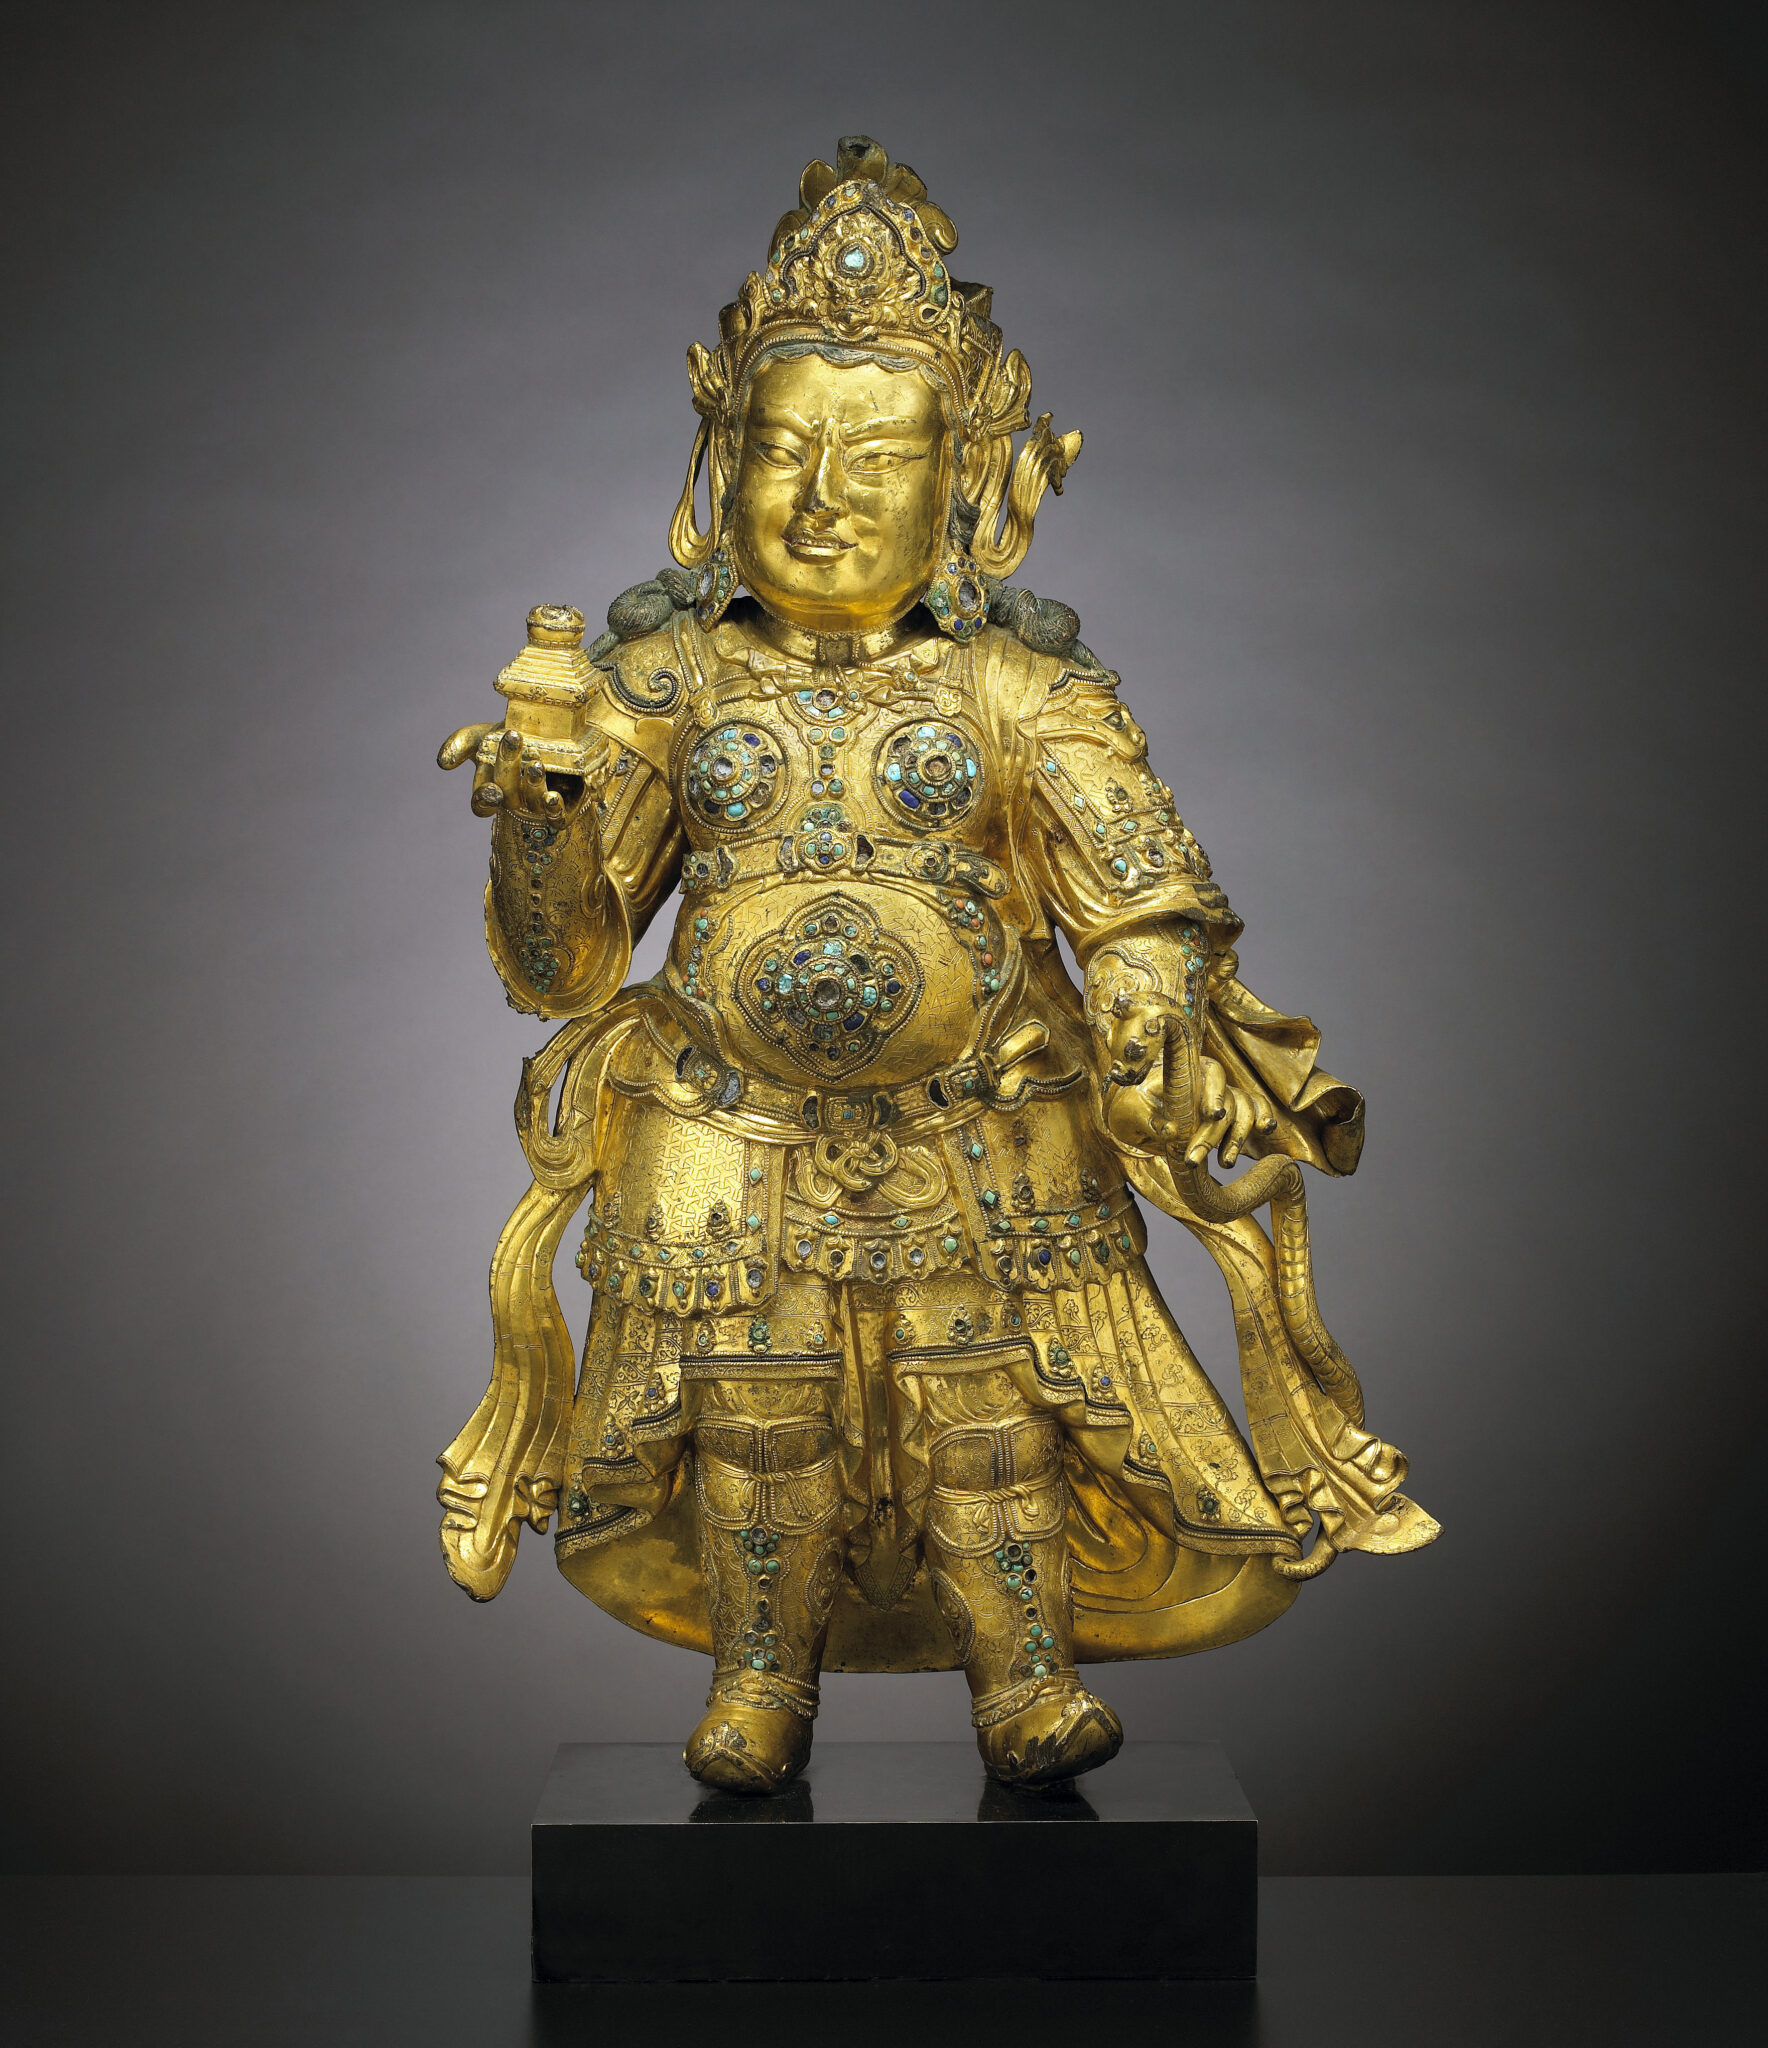 Golden deity statue wearing flowing robe inlaid with blue stones holding votive object in left hand